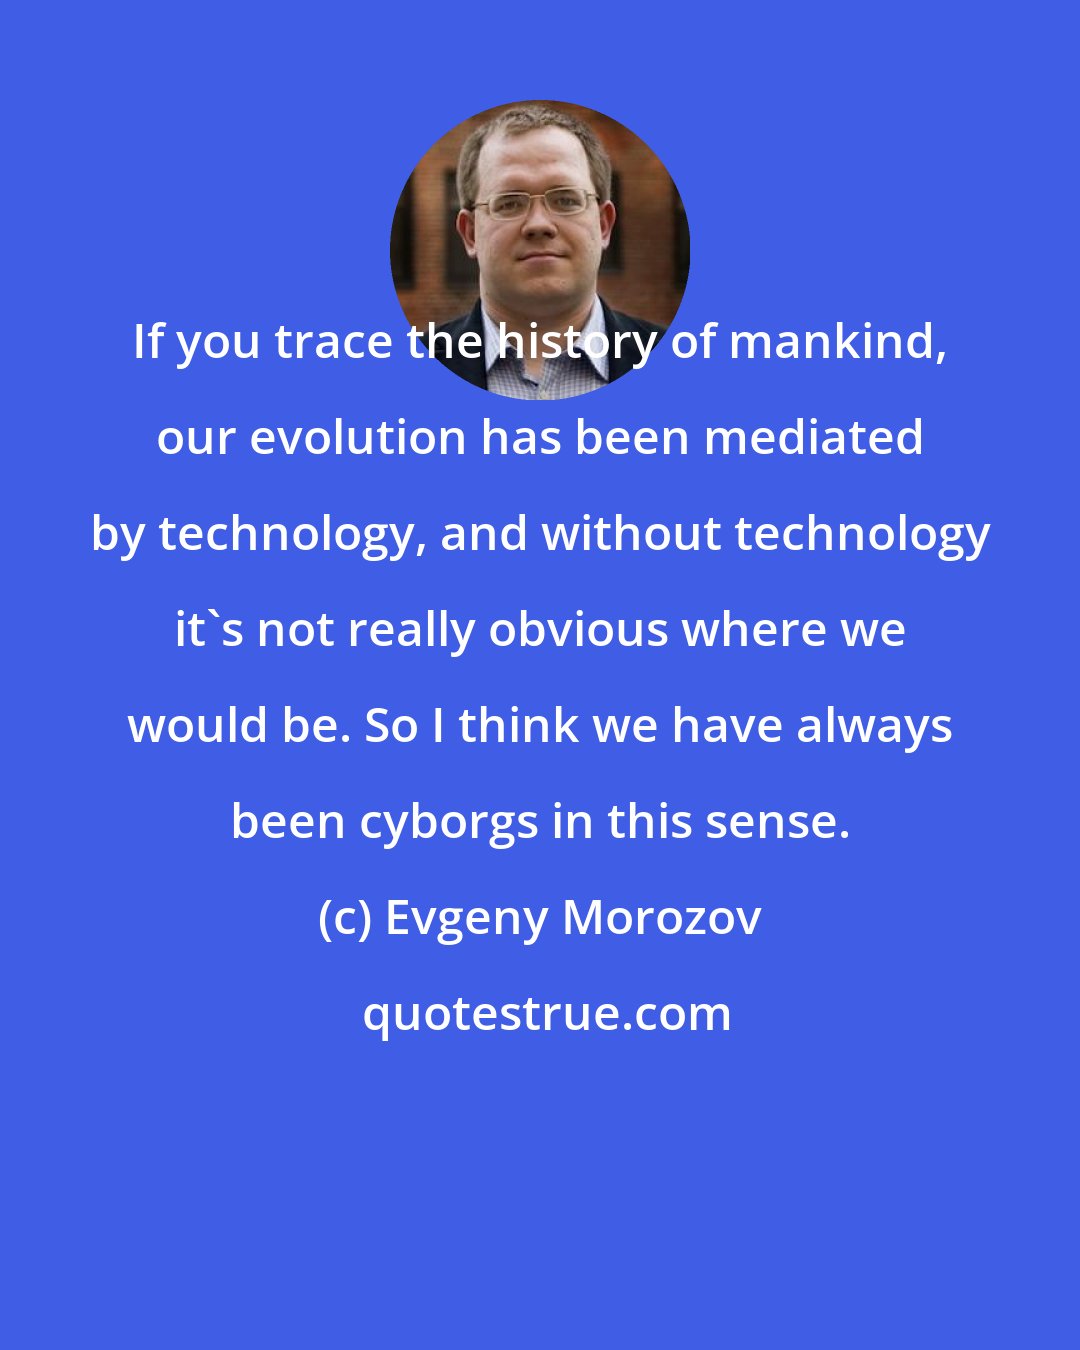 Evgeny Morozov: If you trace the history of mankind, our evolution has been mediated by technology, and without technology it's not really obvious where we would be. So I think we have always been cyborgs in this sense.